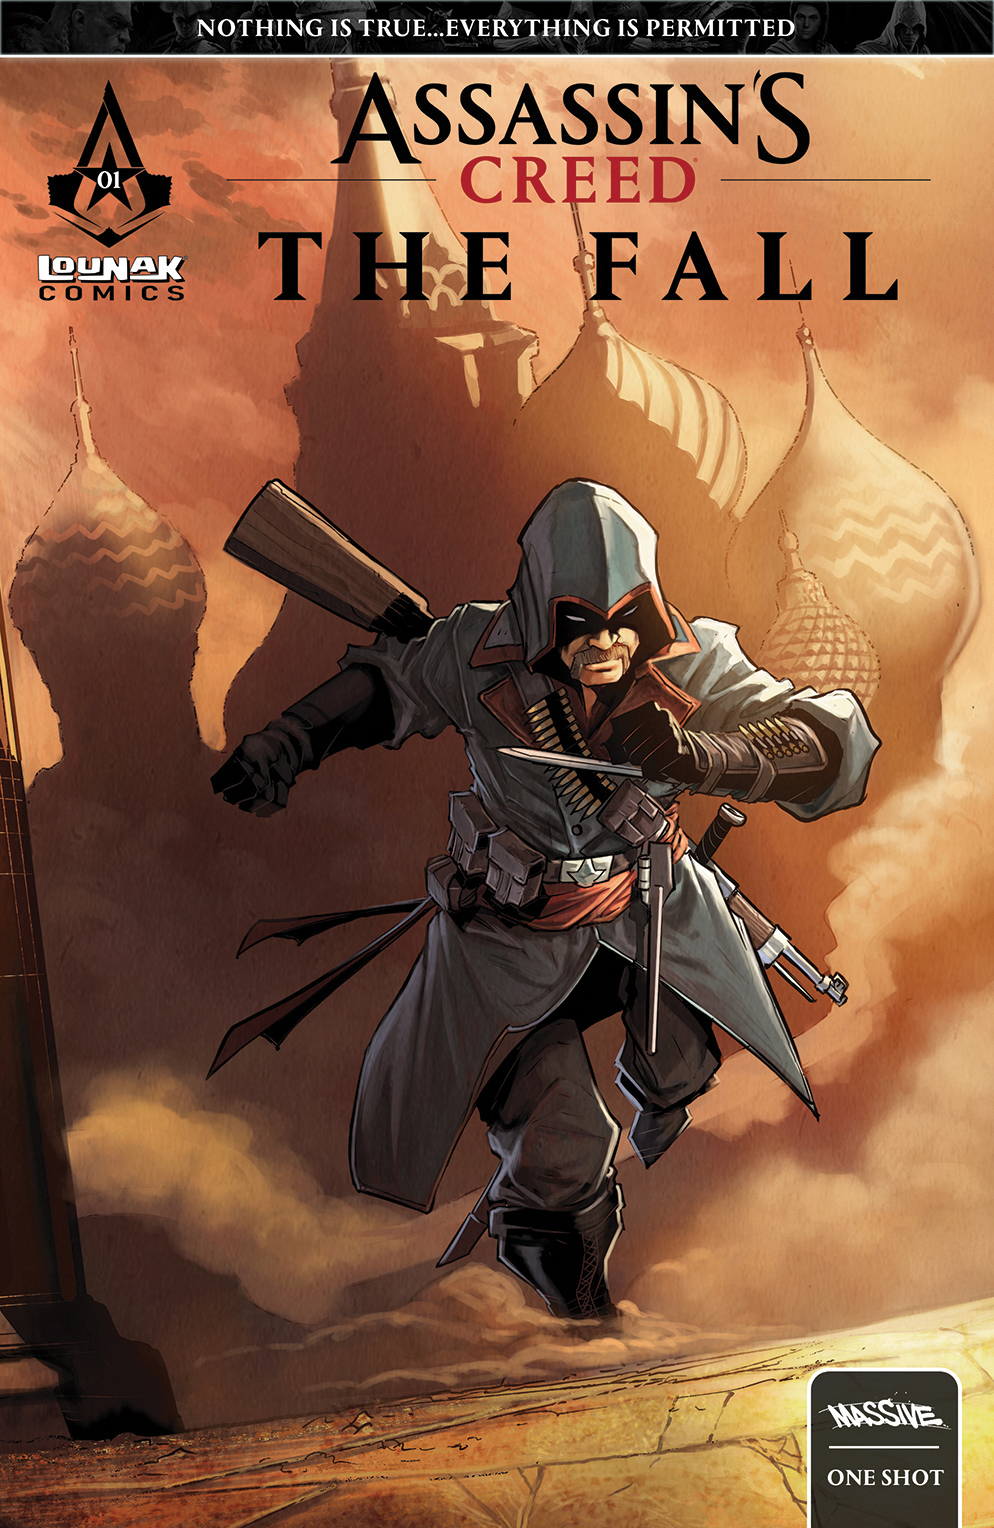 Assassins Creed The Fall #1 Cover B Boutin-Gange (Mature)